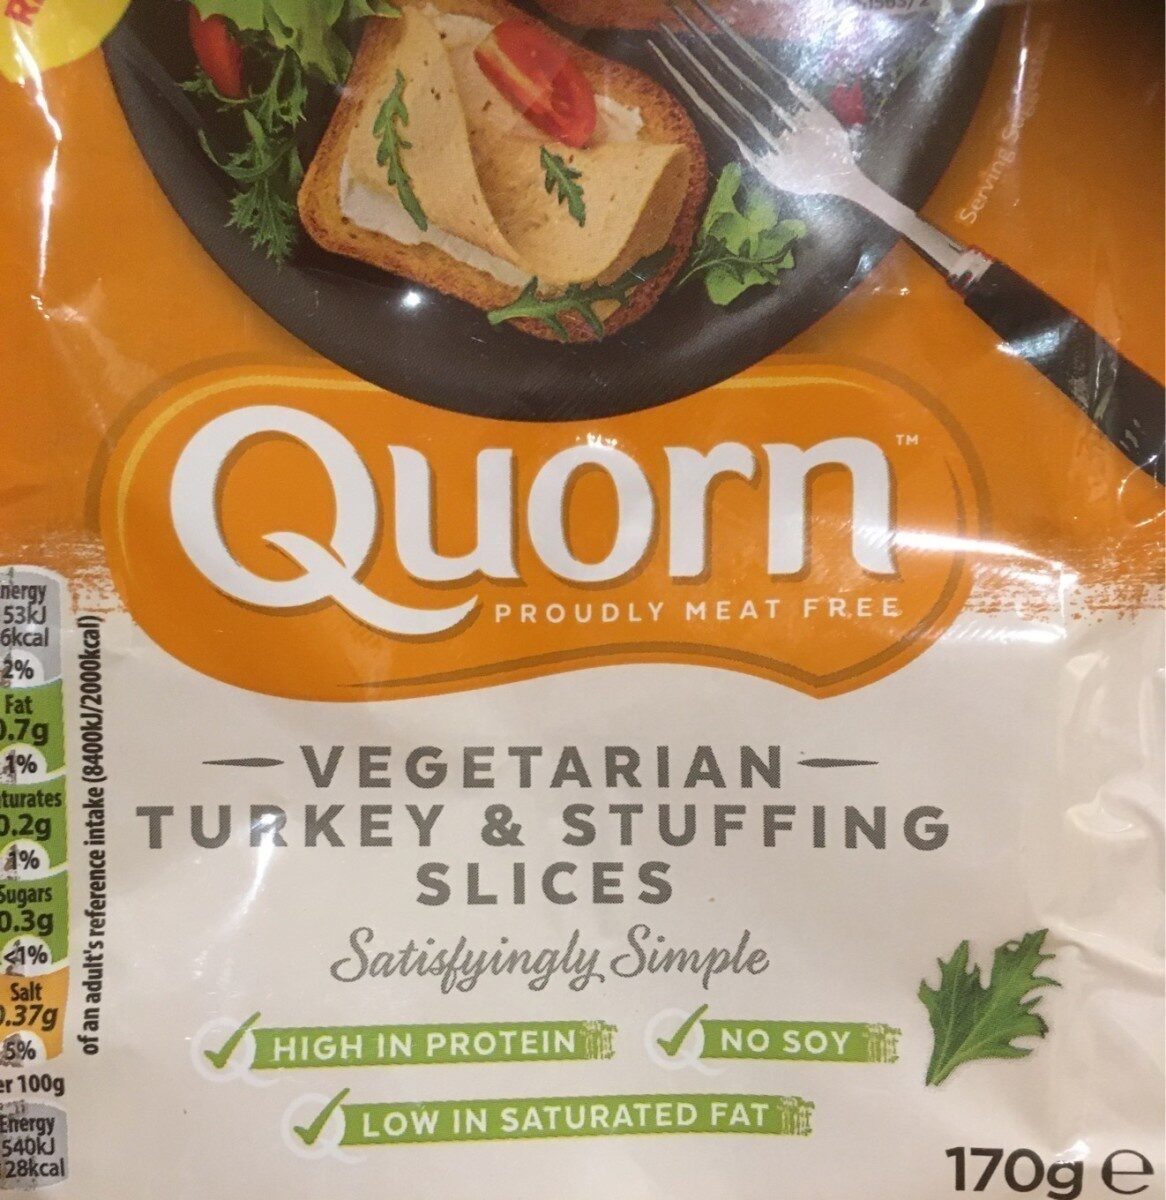 Vegetarian Turkey and Stuffing Slices - Product